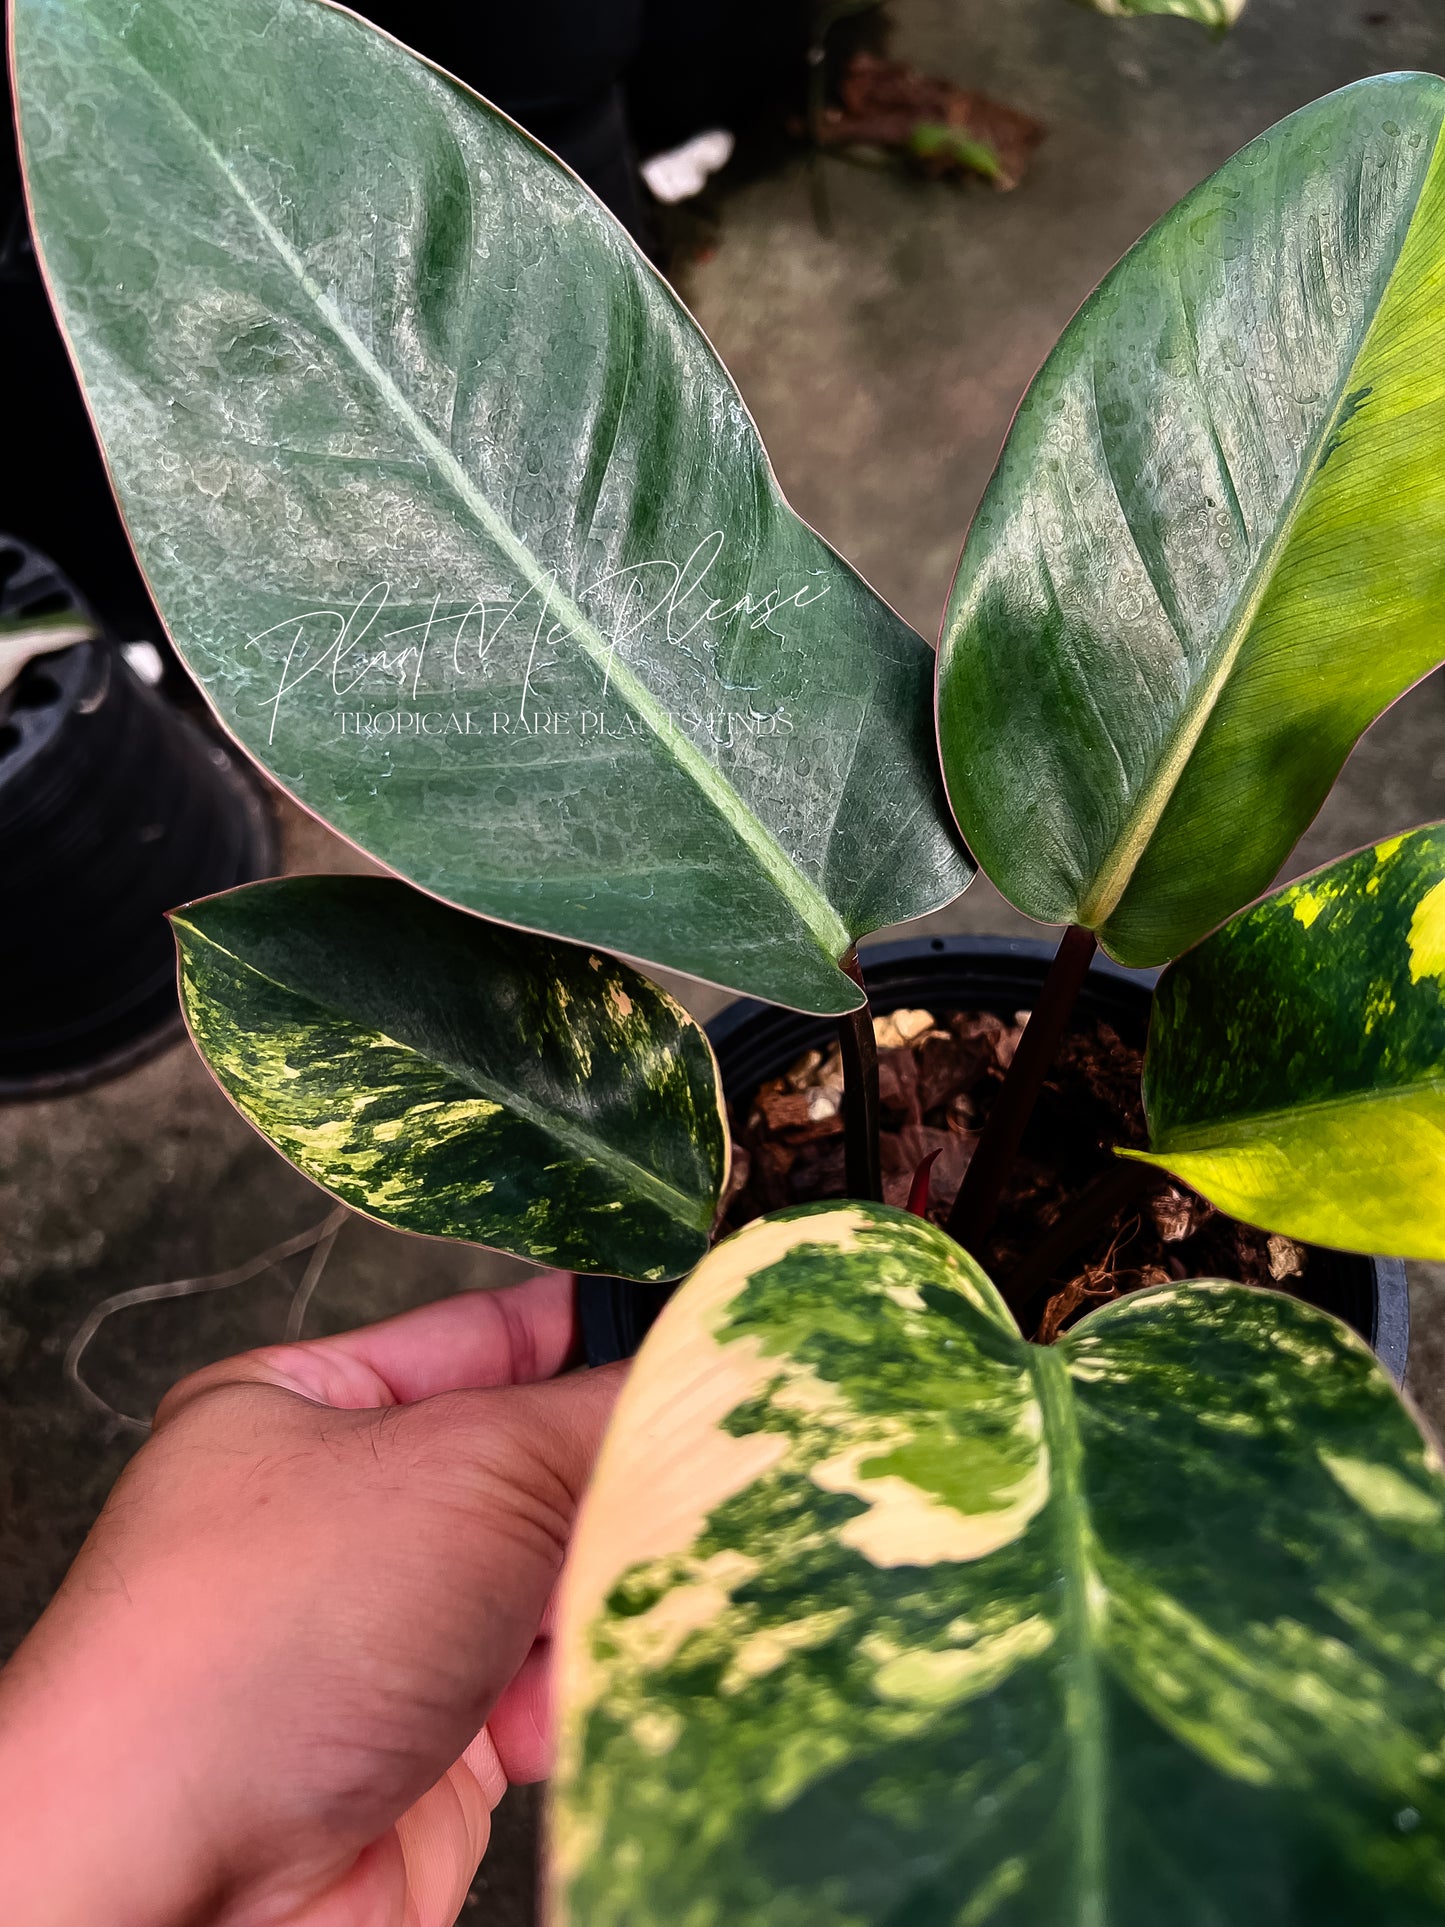 Philodendron Yellow Congo Variegated